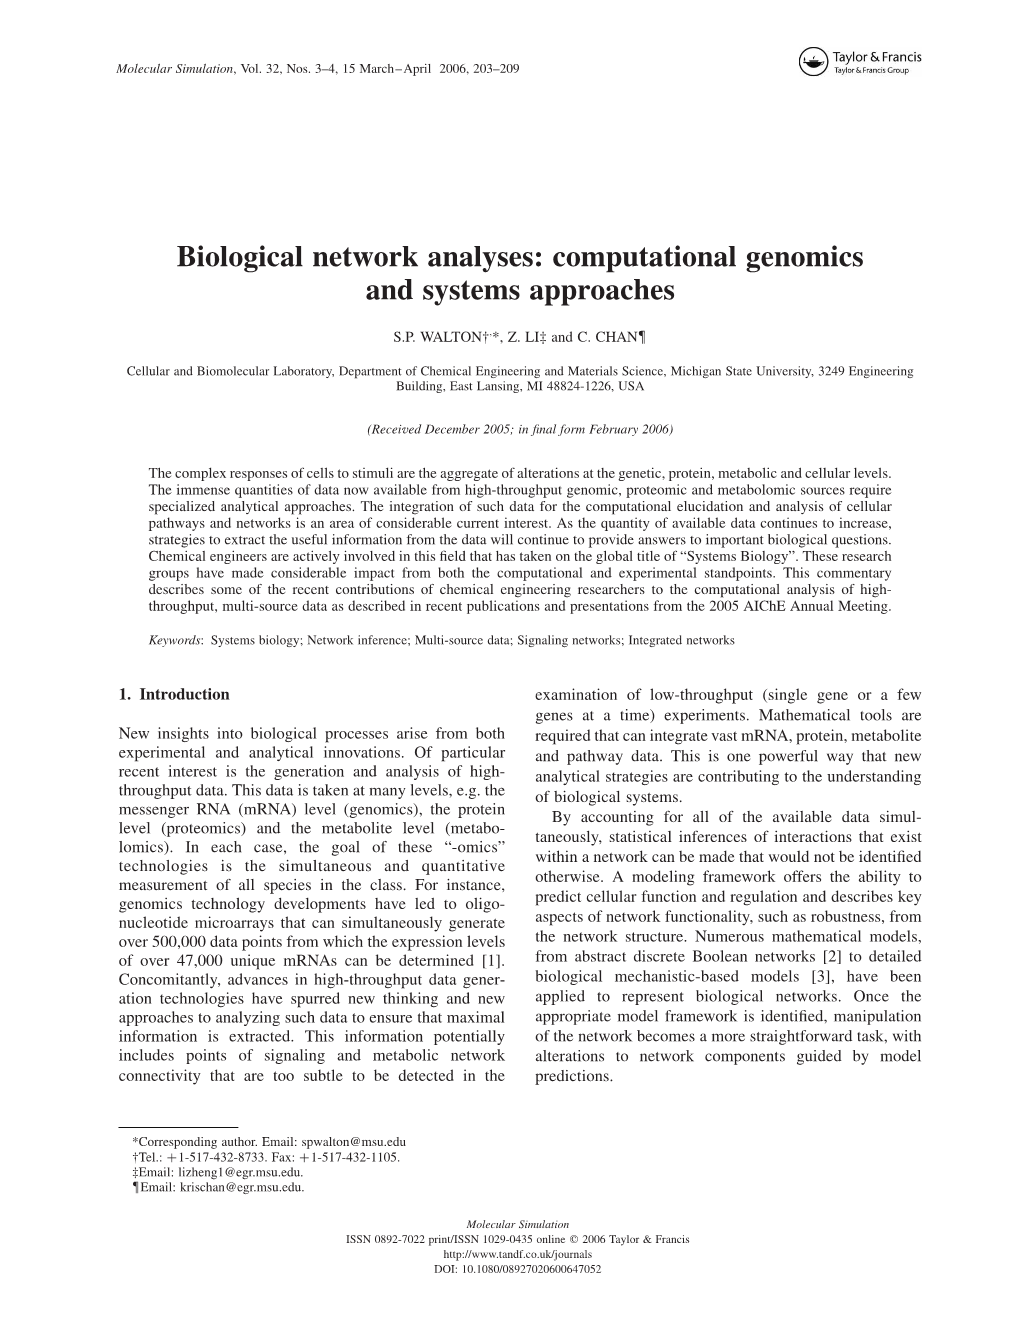 Biological Network Analyses: Computational Genomics and Systems Approaches